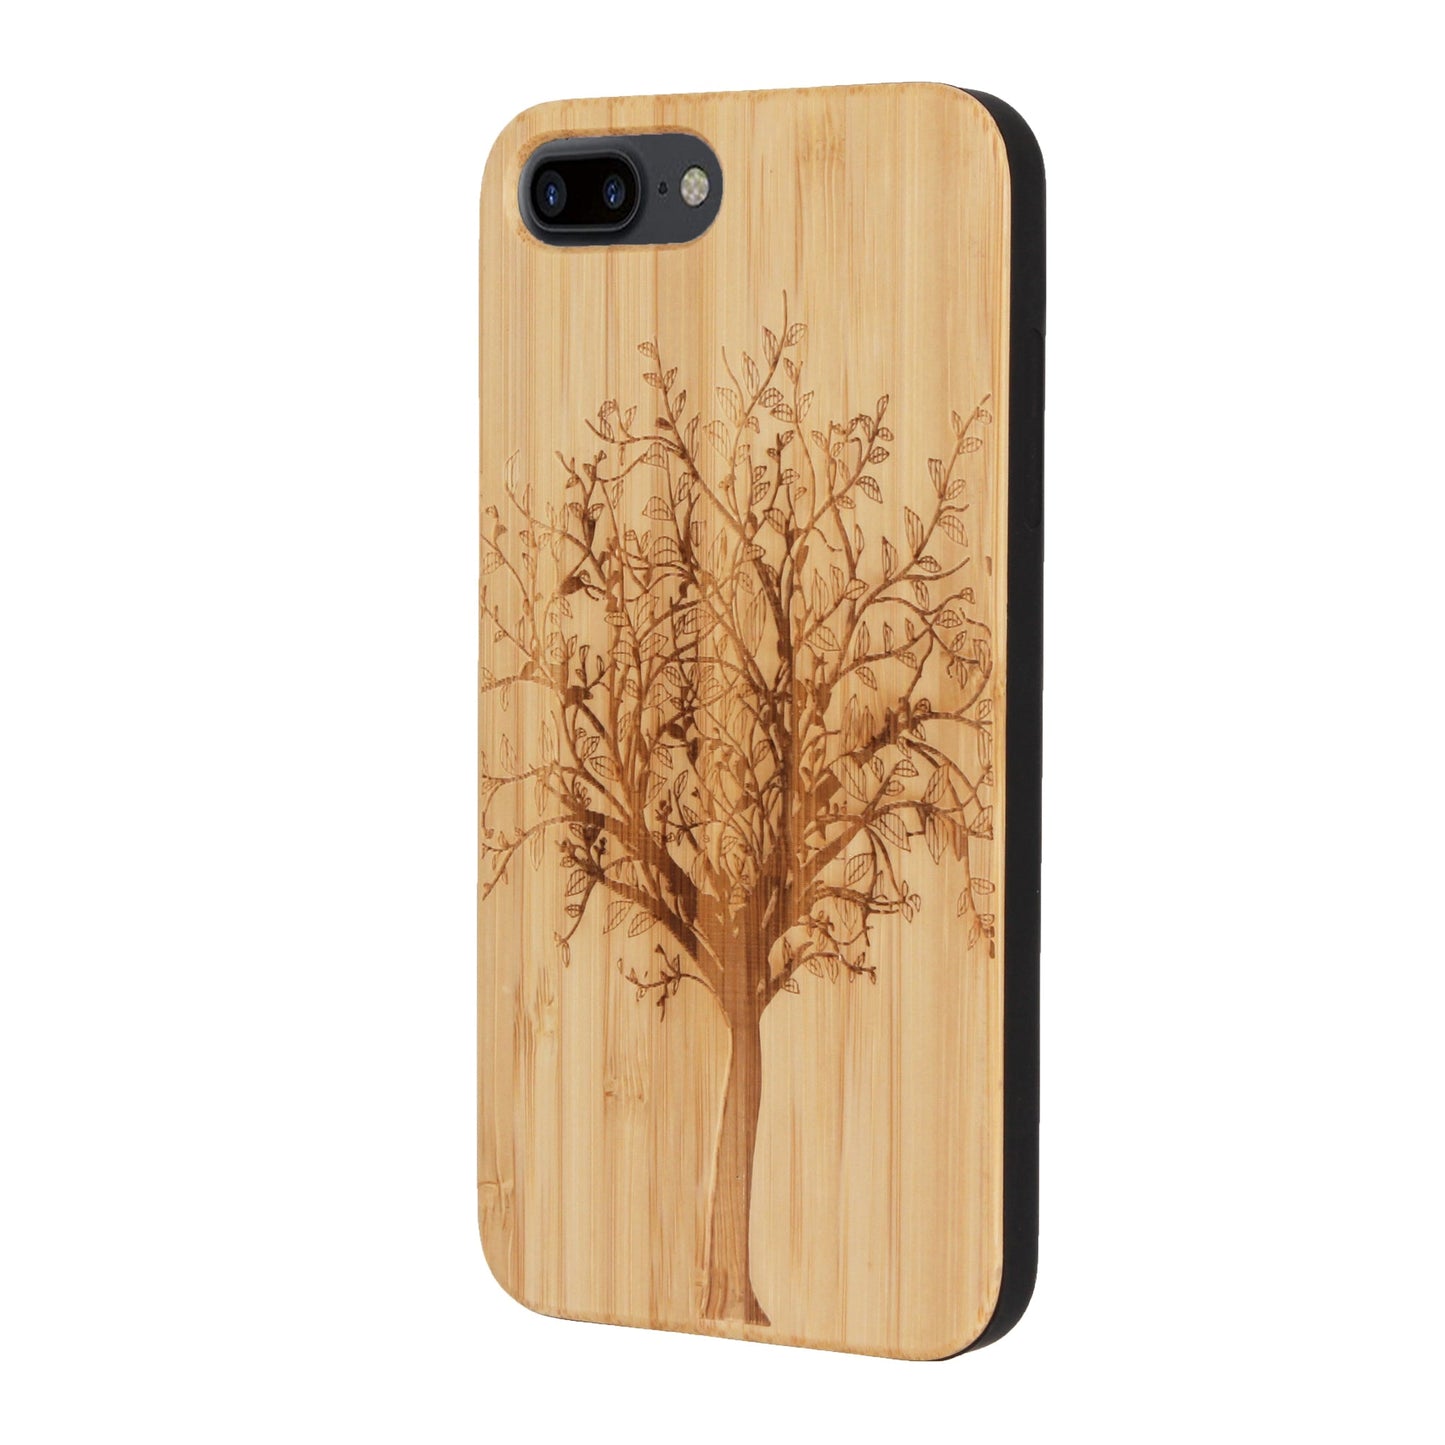 Tree of Life Eden Bamboo Case for iPhone 6/6S/7/8 Plus